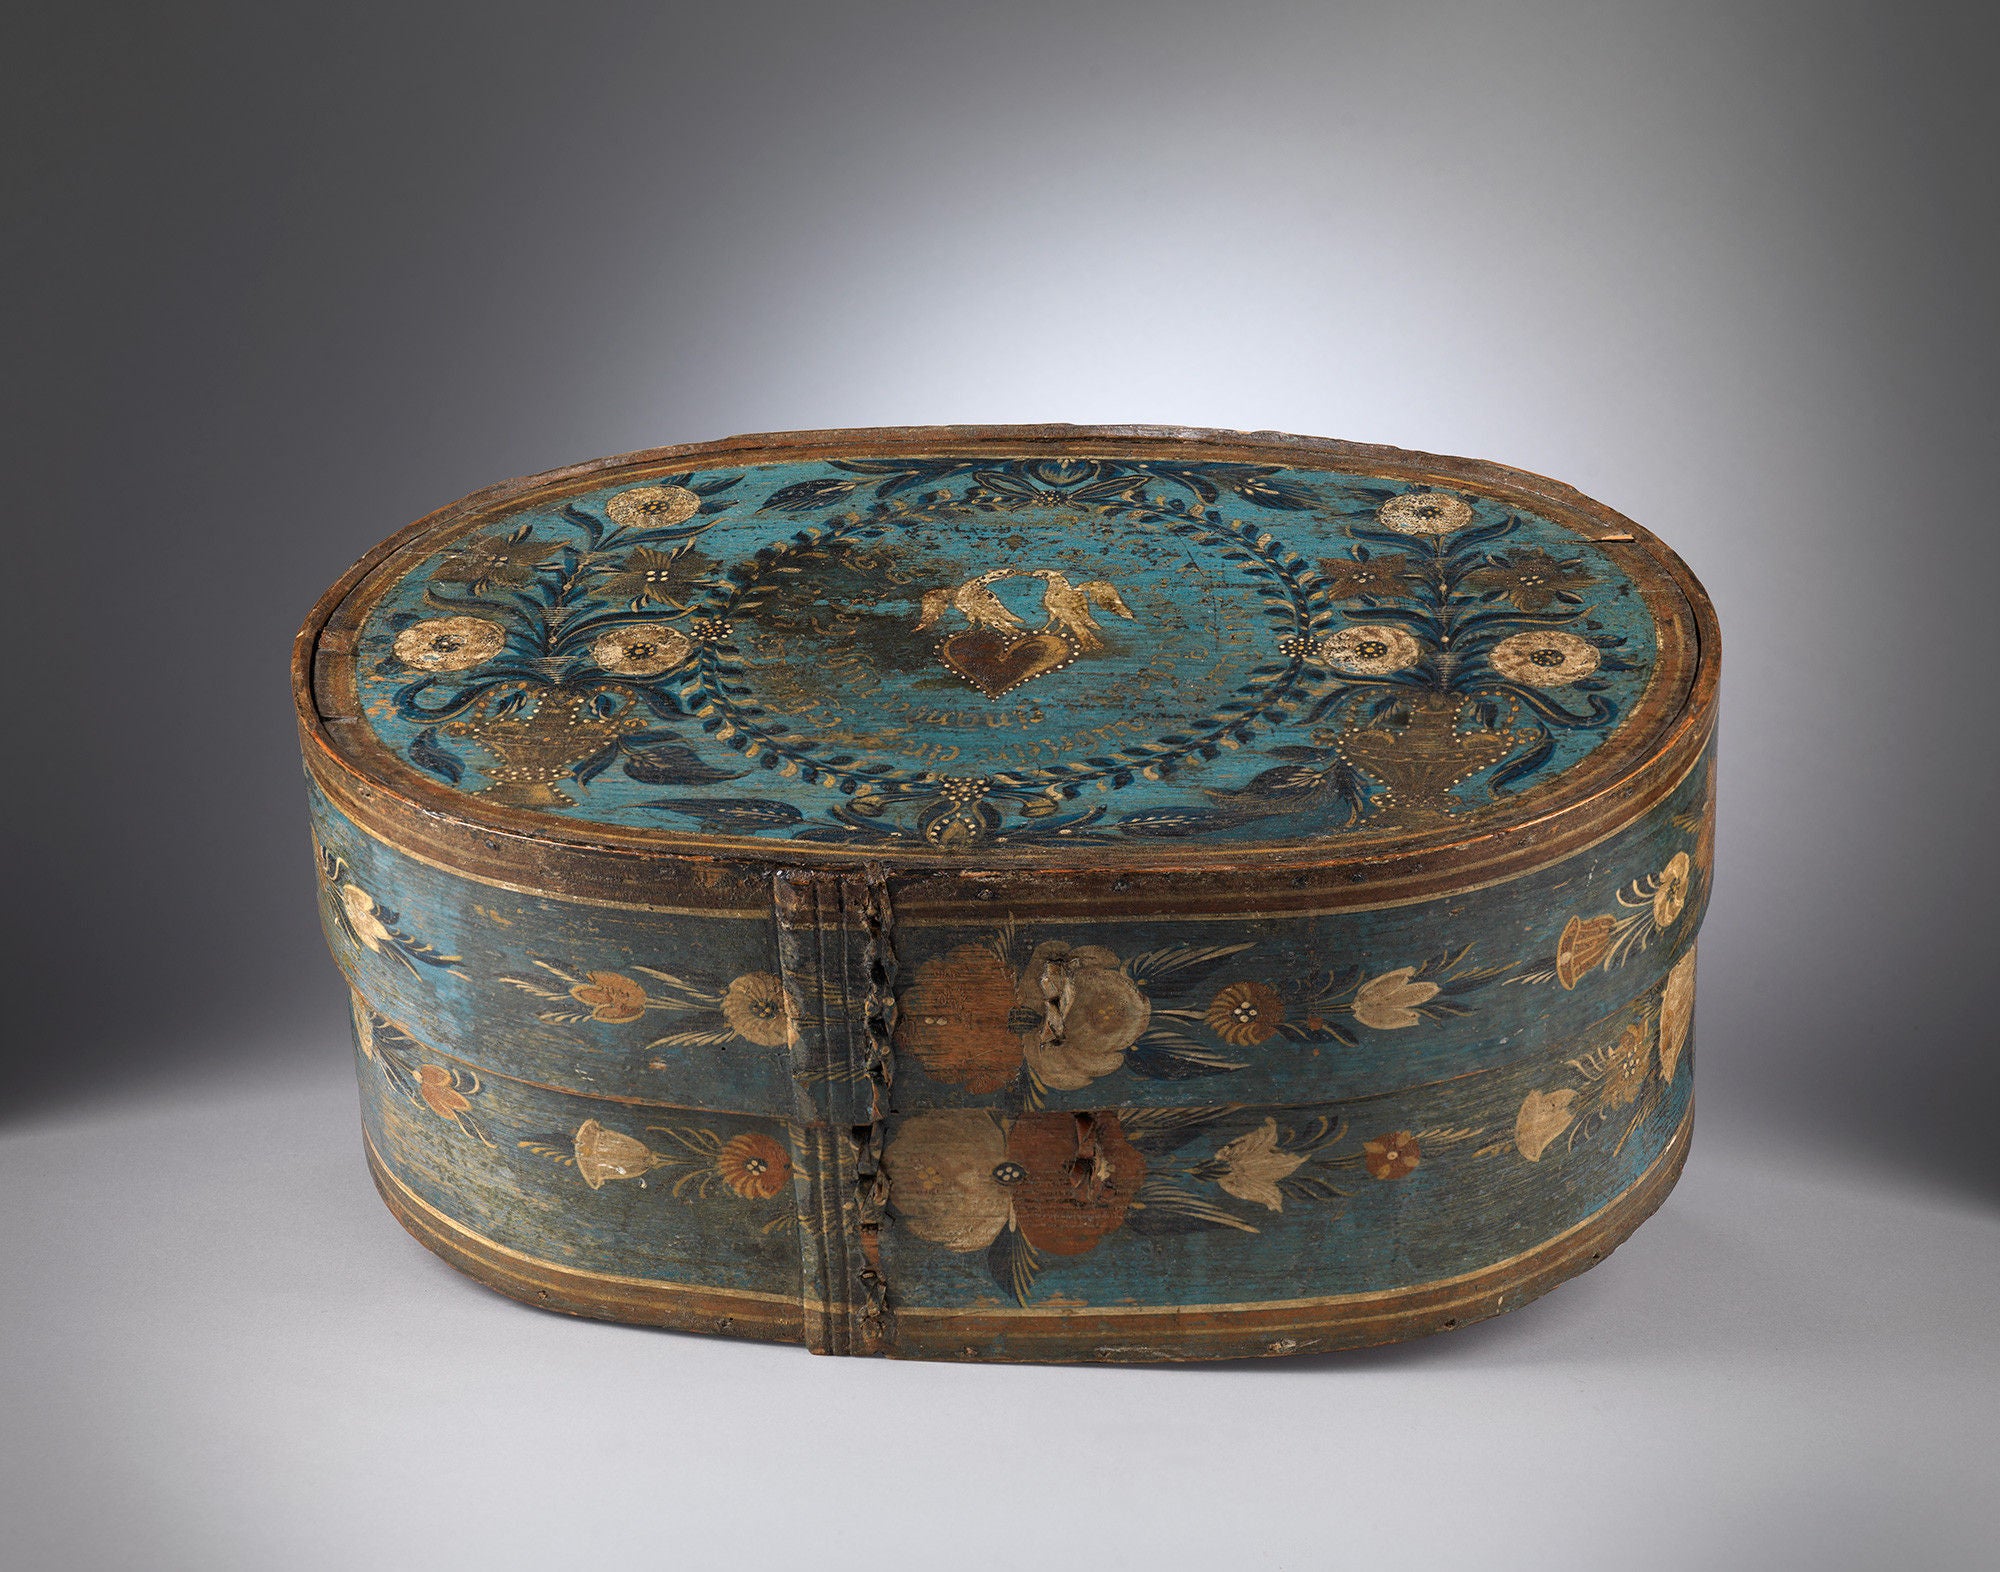 Remarkable Collection of Six Oval Bride's Boxes or "Brautschachteln"